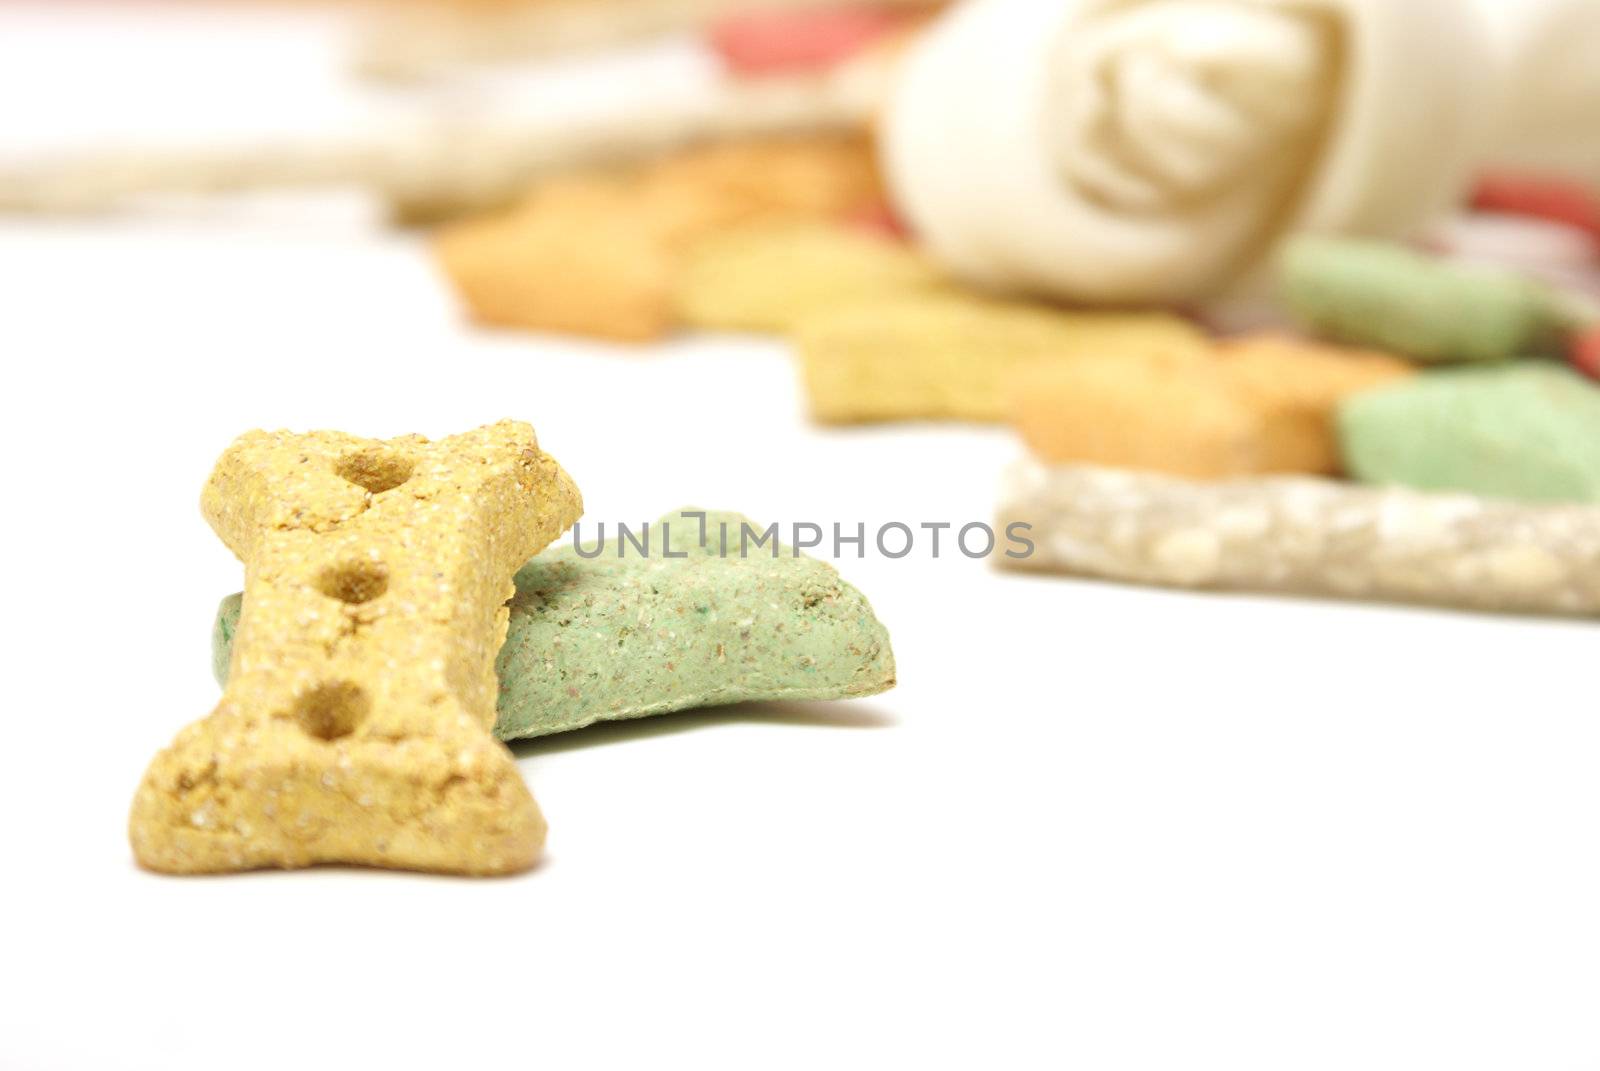 Different coloured dog treats infront of a pile of others.